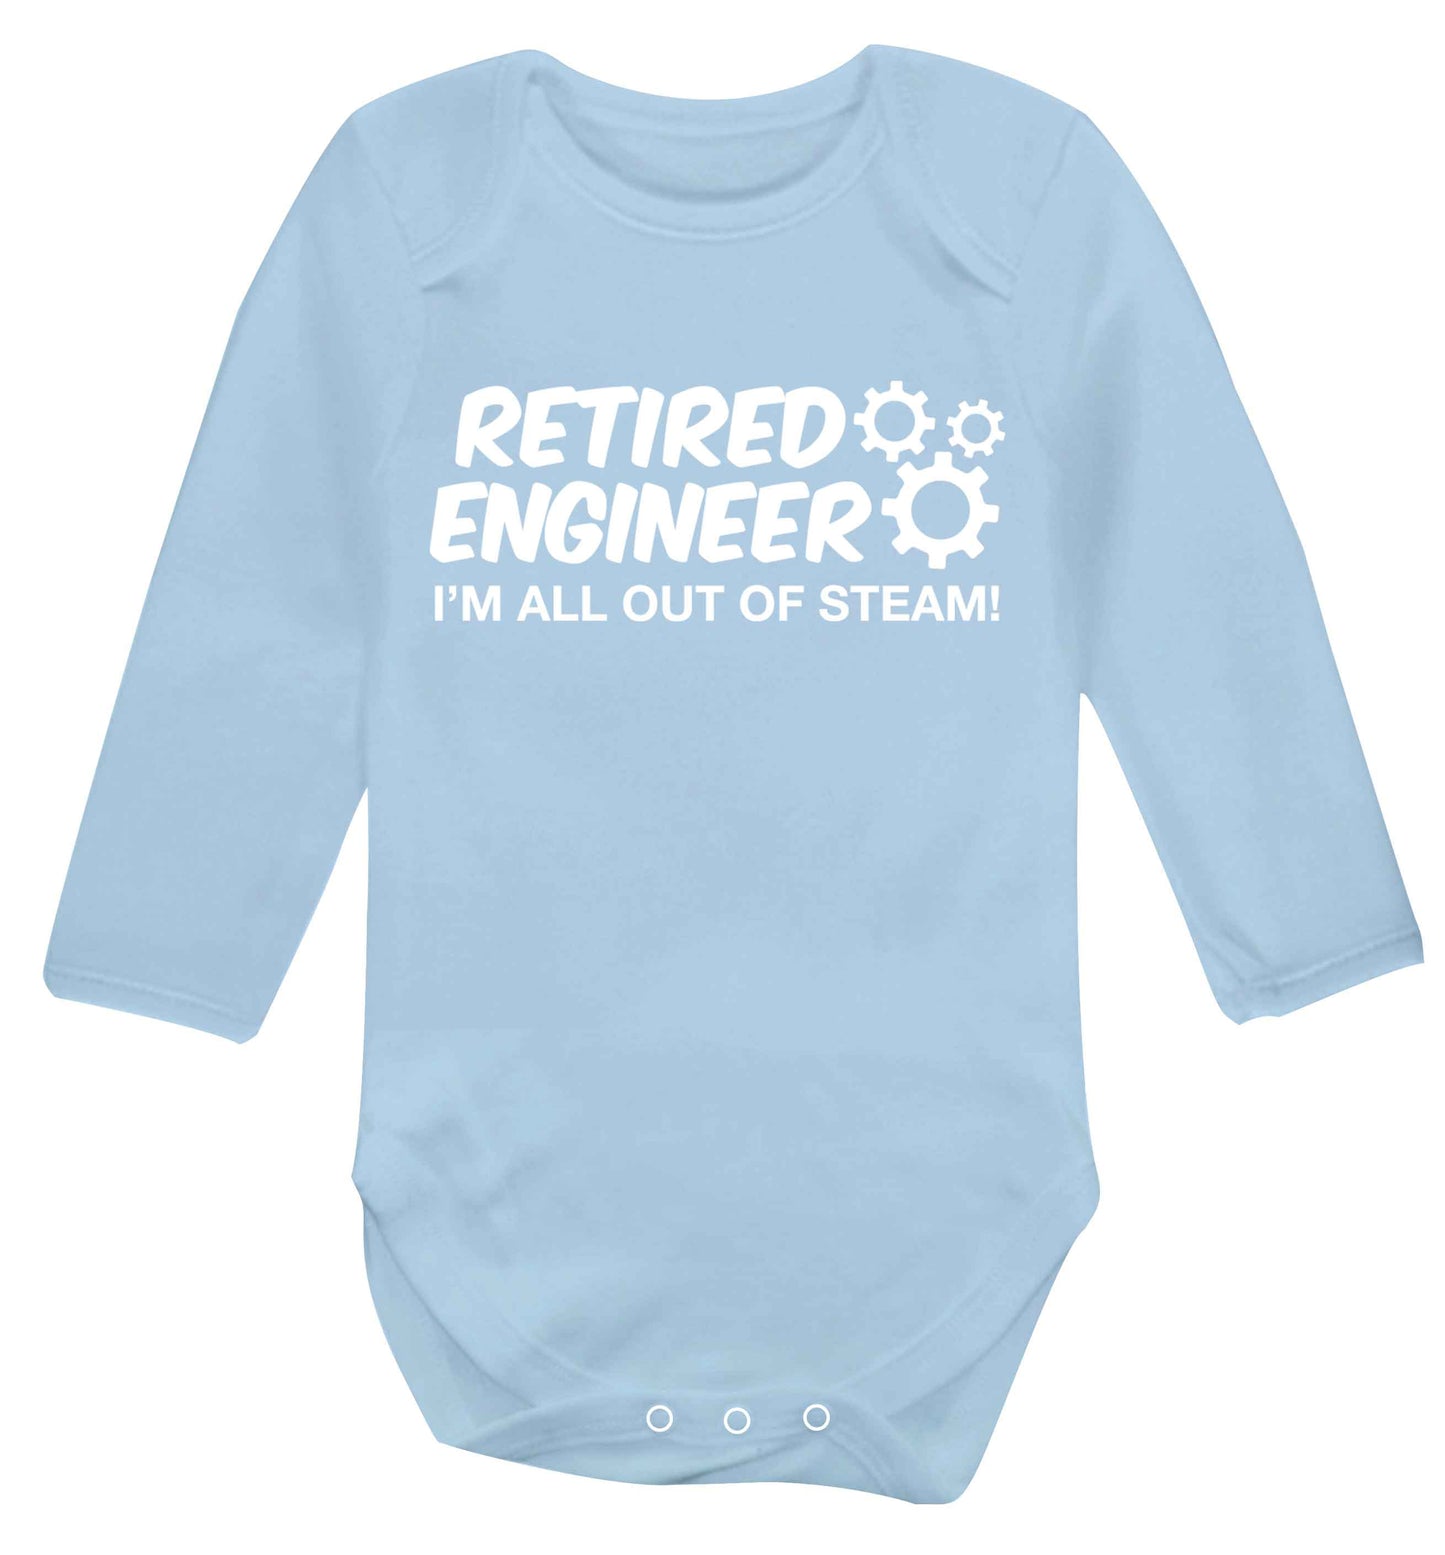 Retired engineer I'm all out of steam Baby Vest long sleeved pale blue 6-12 months